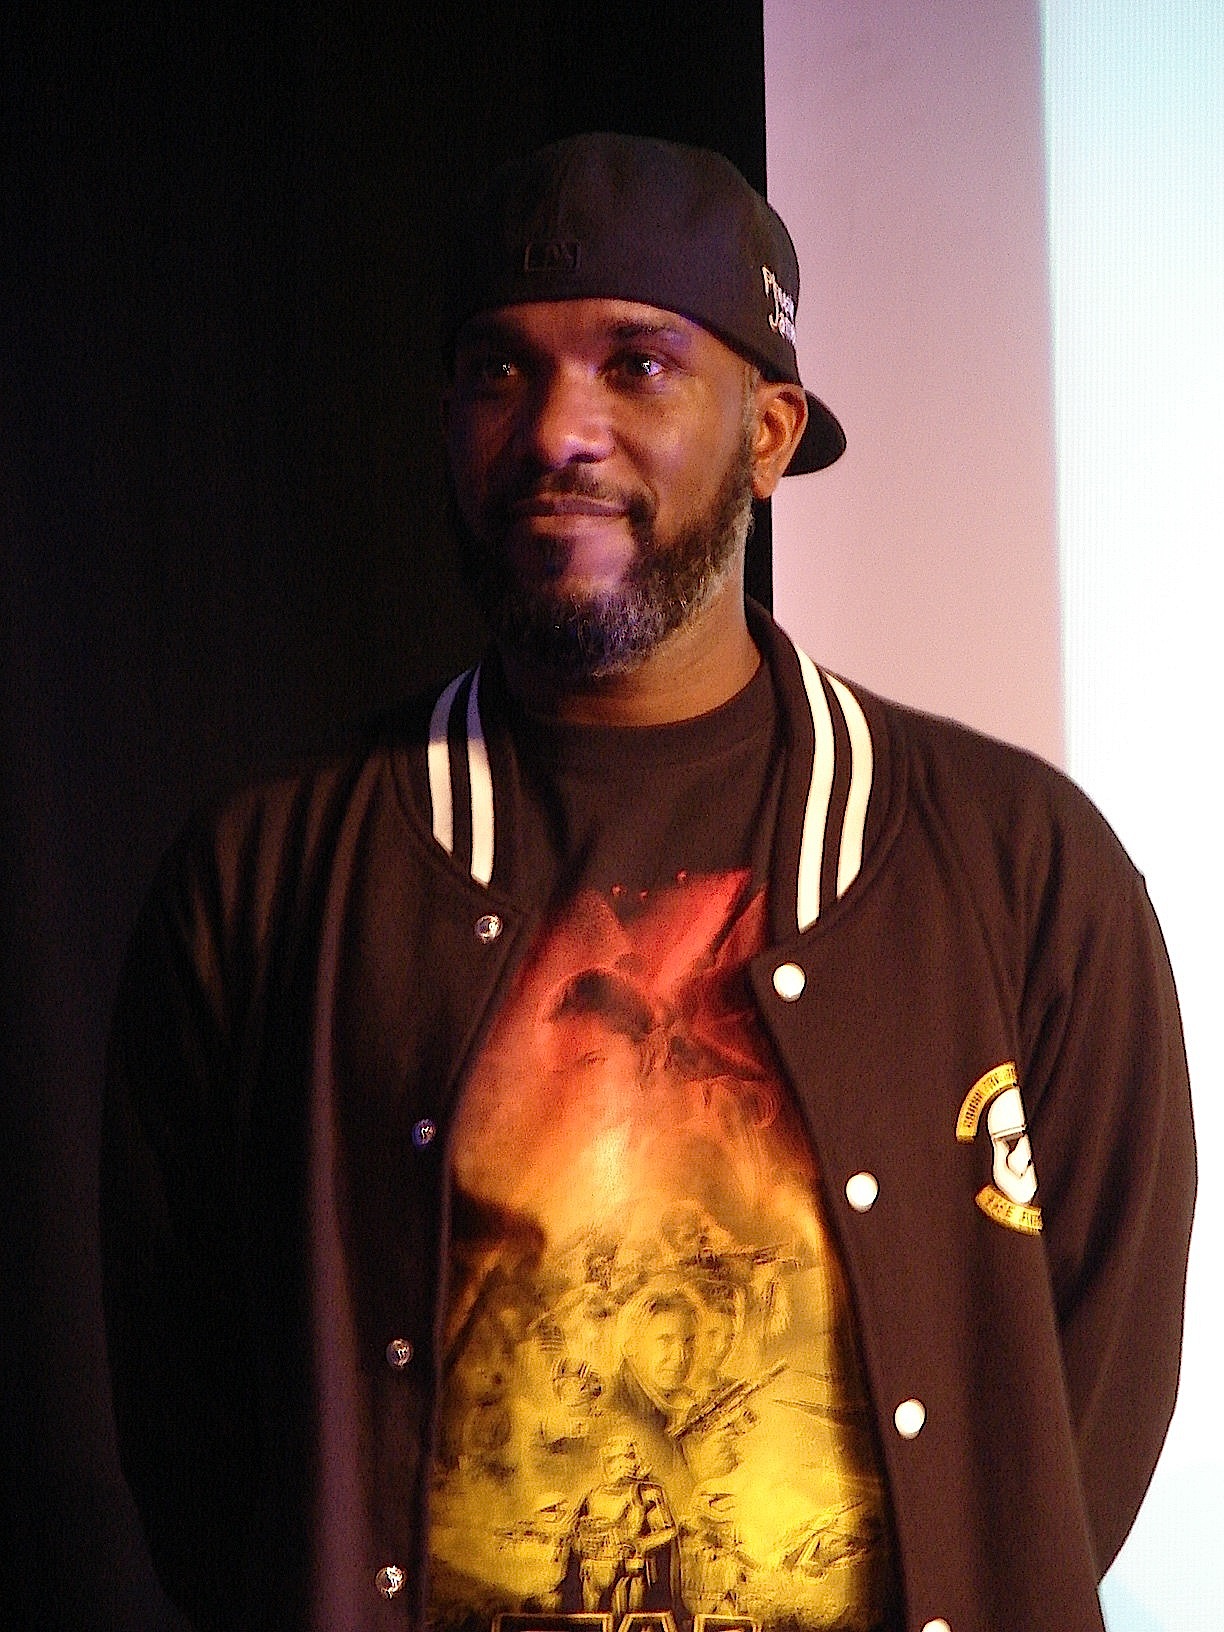 Stormtrooper Actor Phoenix James at ASFA Star Wars Convention in Amélie les Bains in South of France - Photo by Virginie Maurille 49